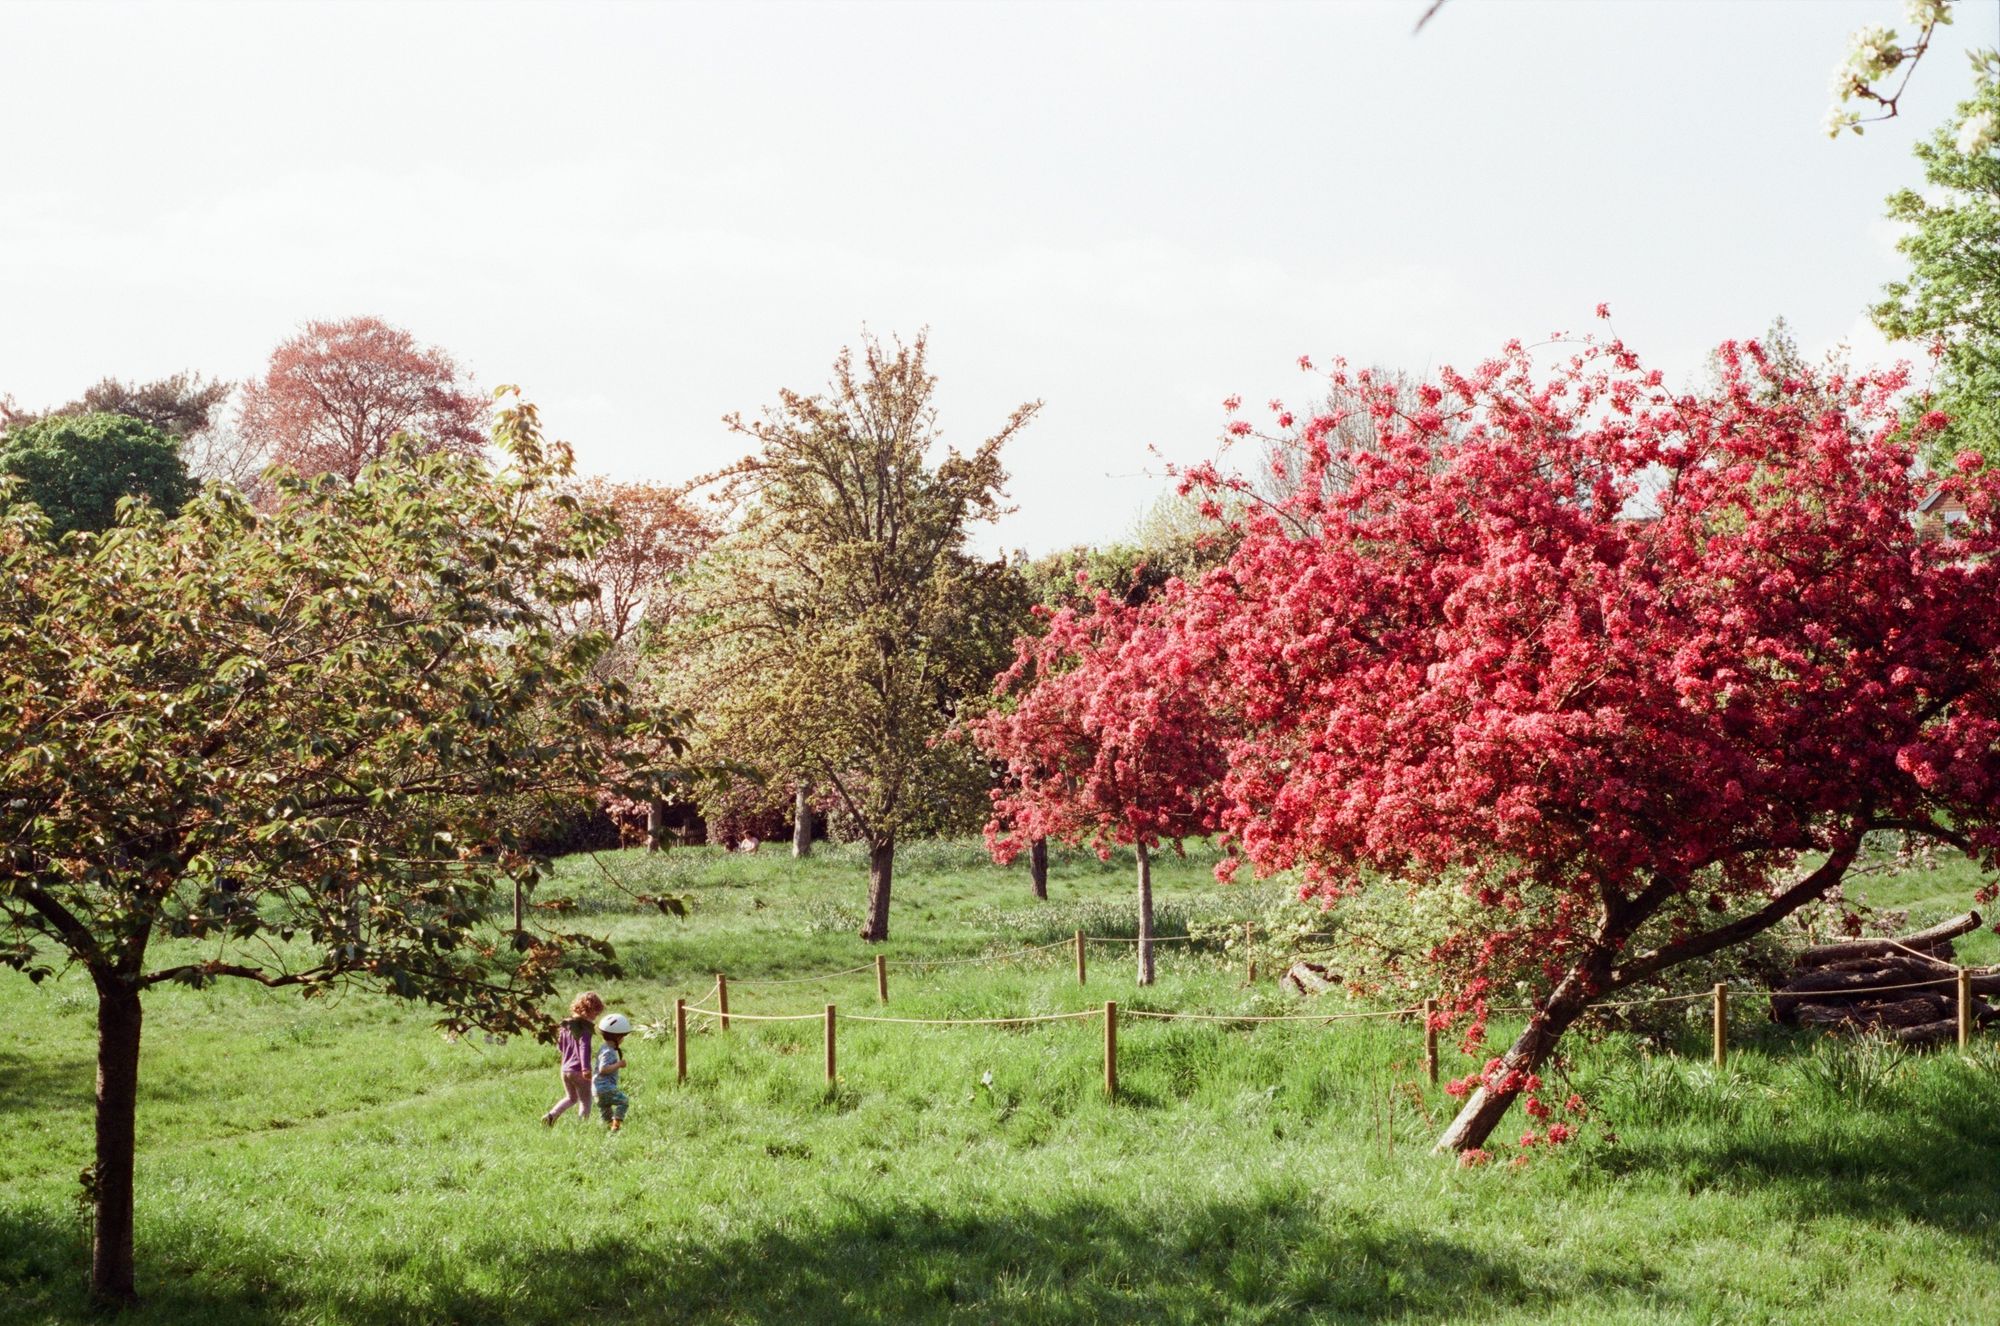 Small children run and play in a field towards a plum tree in a full reddish-pink-sorbet colour blossom.